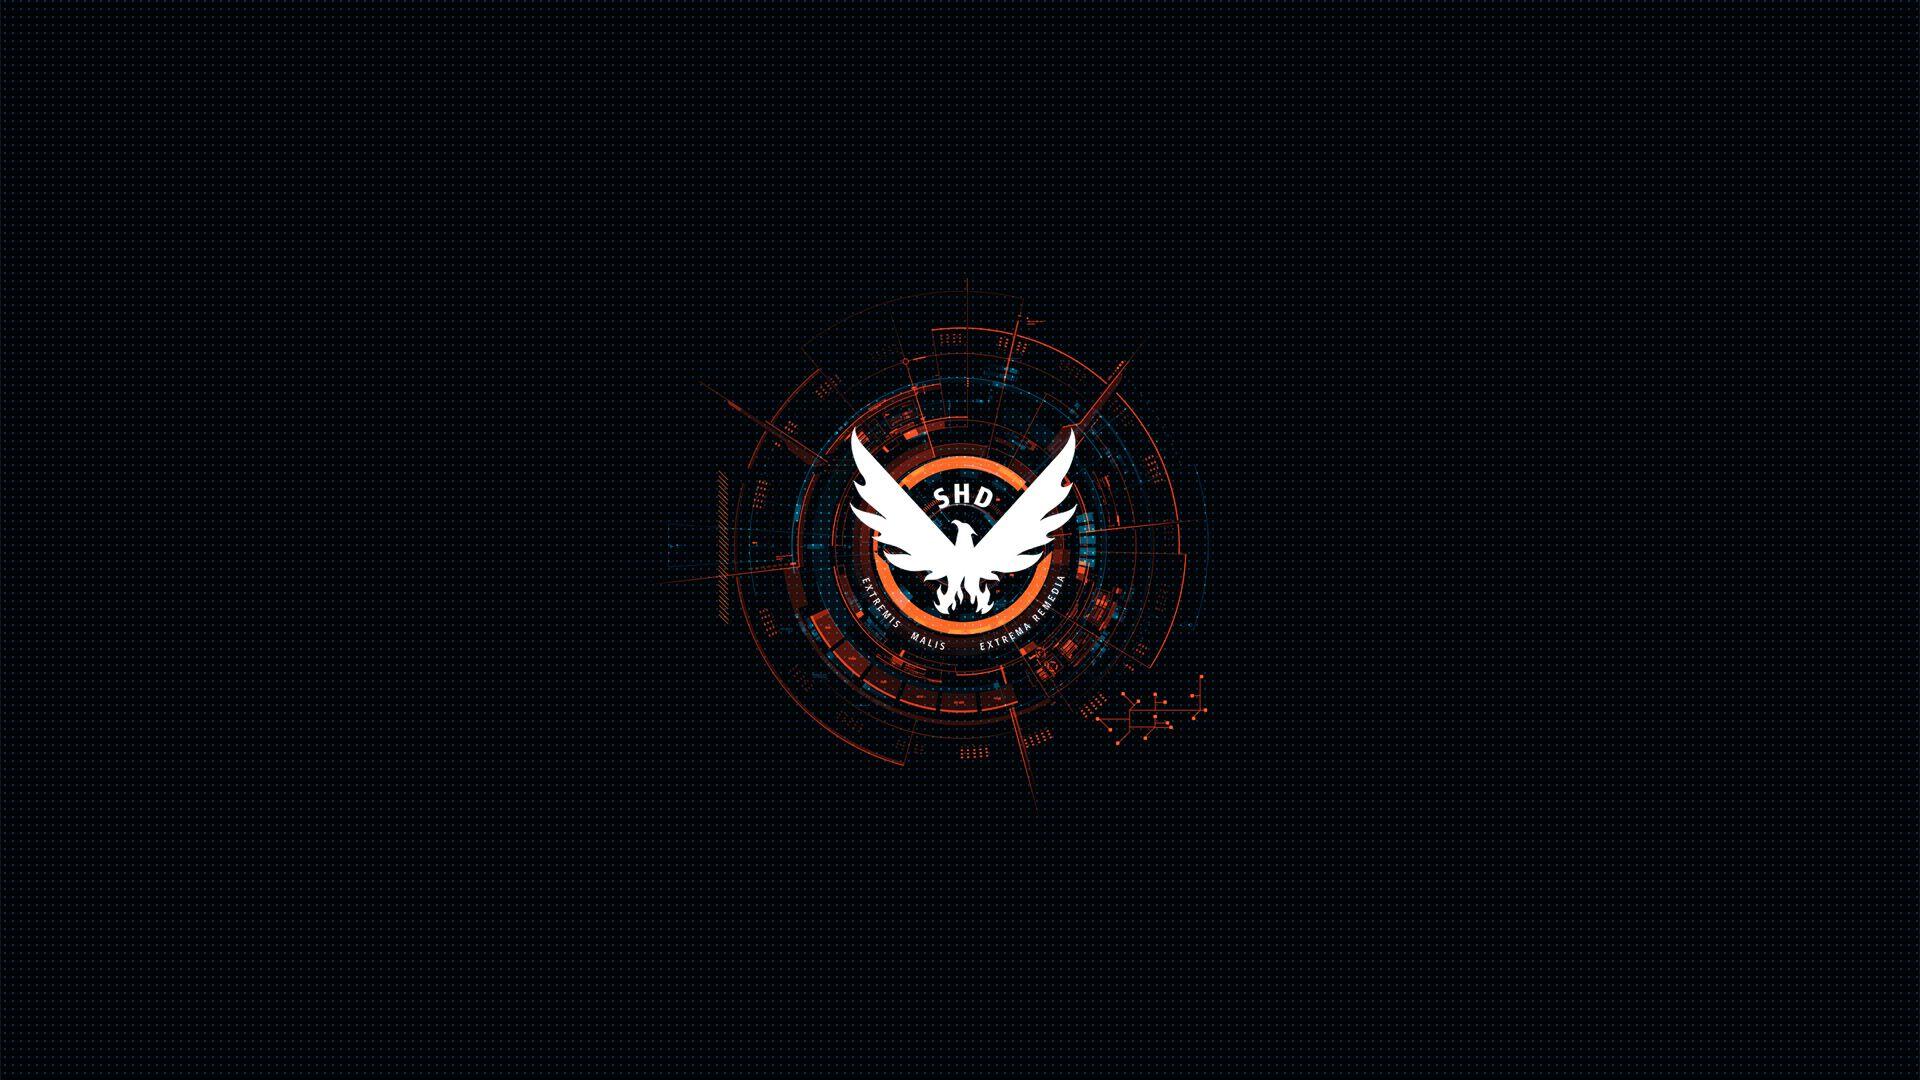 The Division 4k Wallpapers Top Free The Division 4k Backgrounds Wallpaperaccess